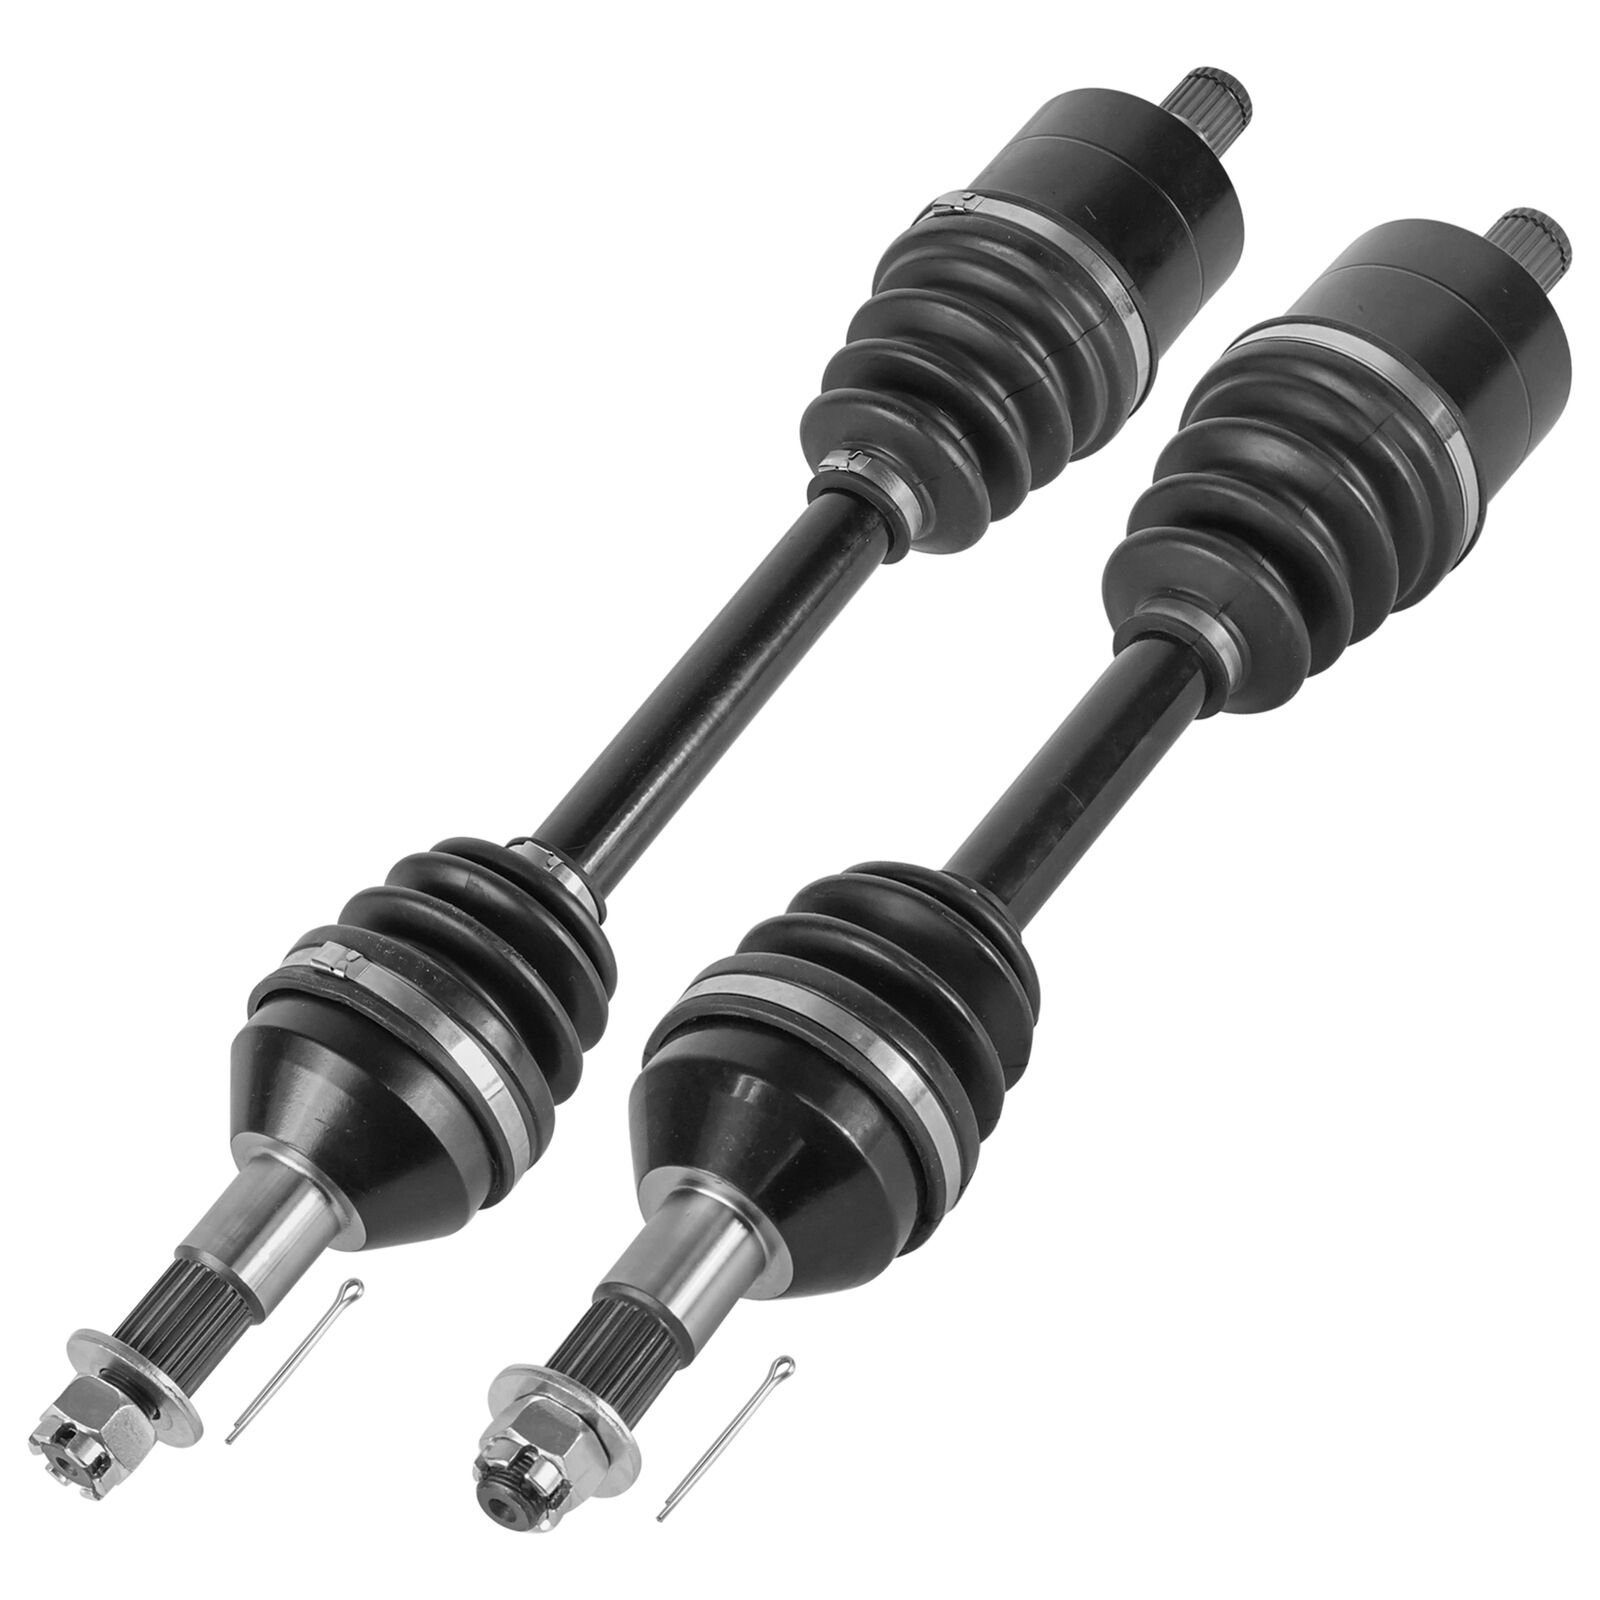 Rear Left And Right CV Joint Axles for Can-Am Outlander 800R 4X4 EFI 2009-2012